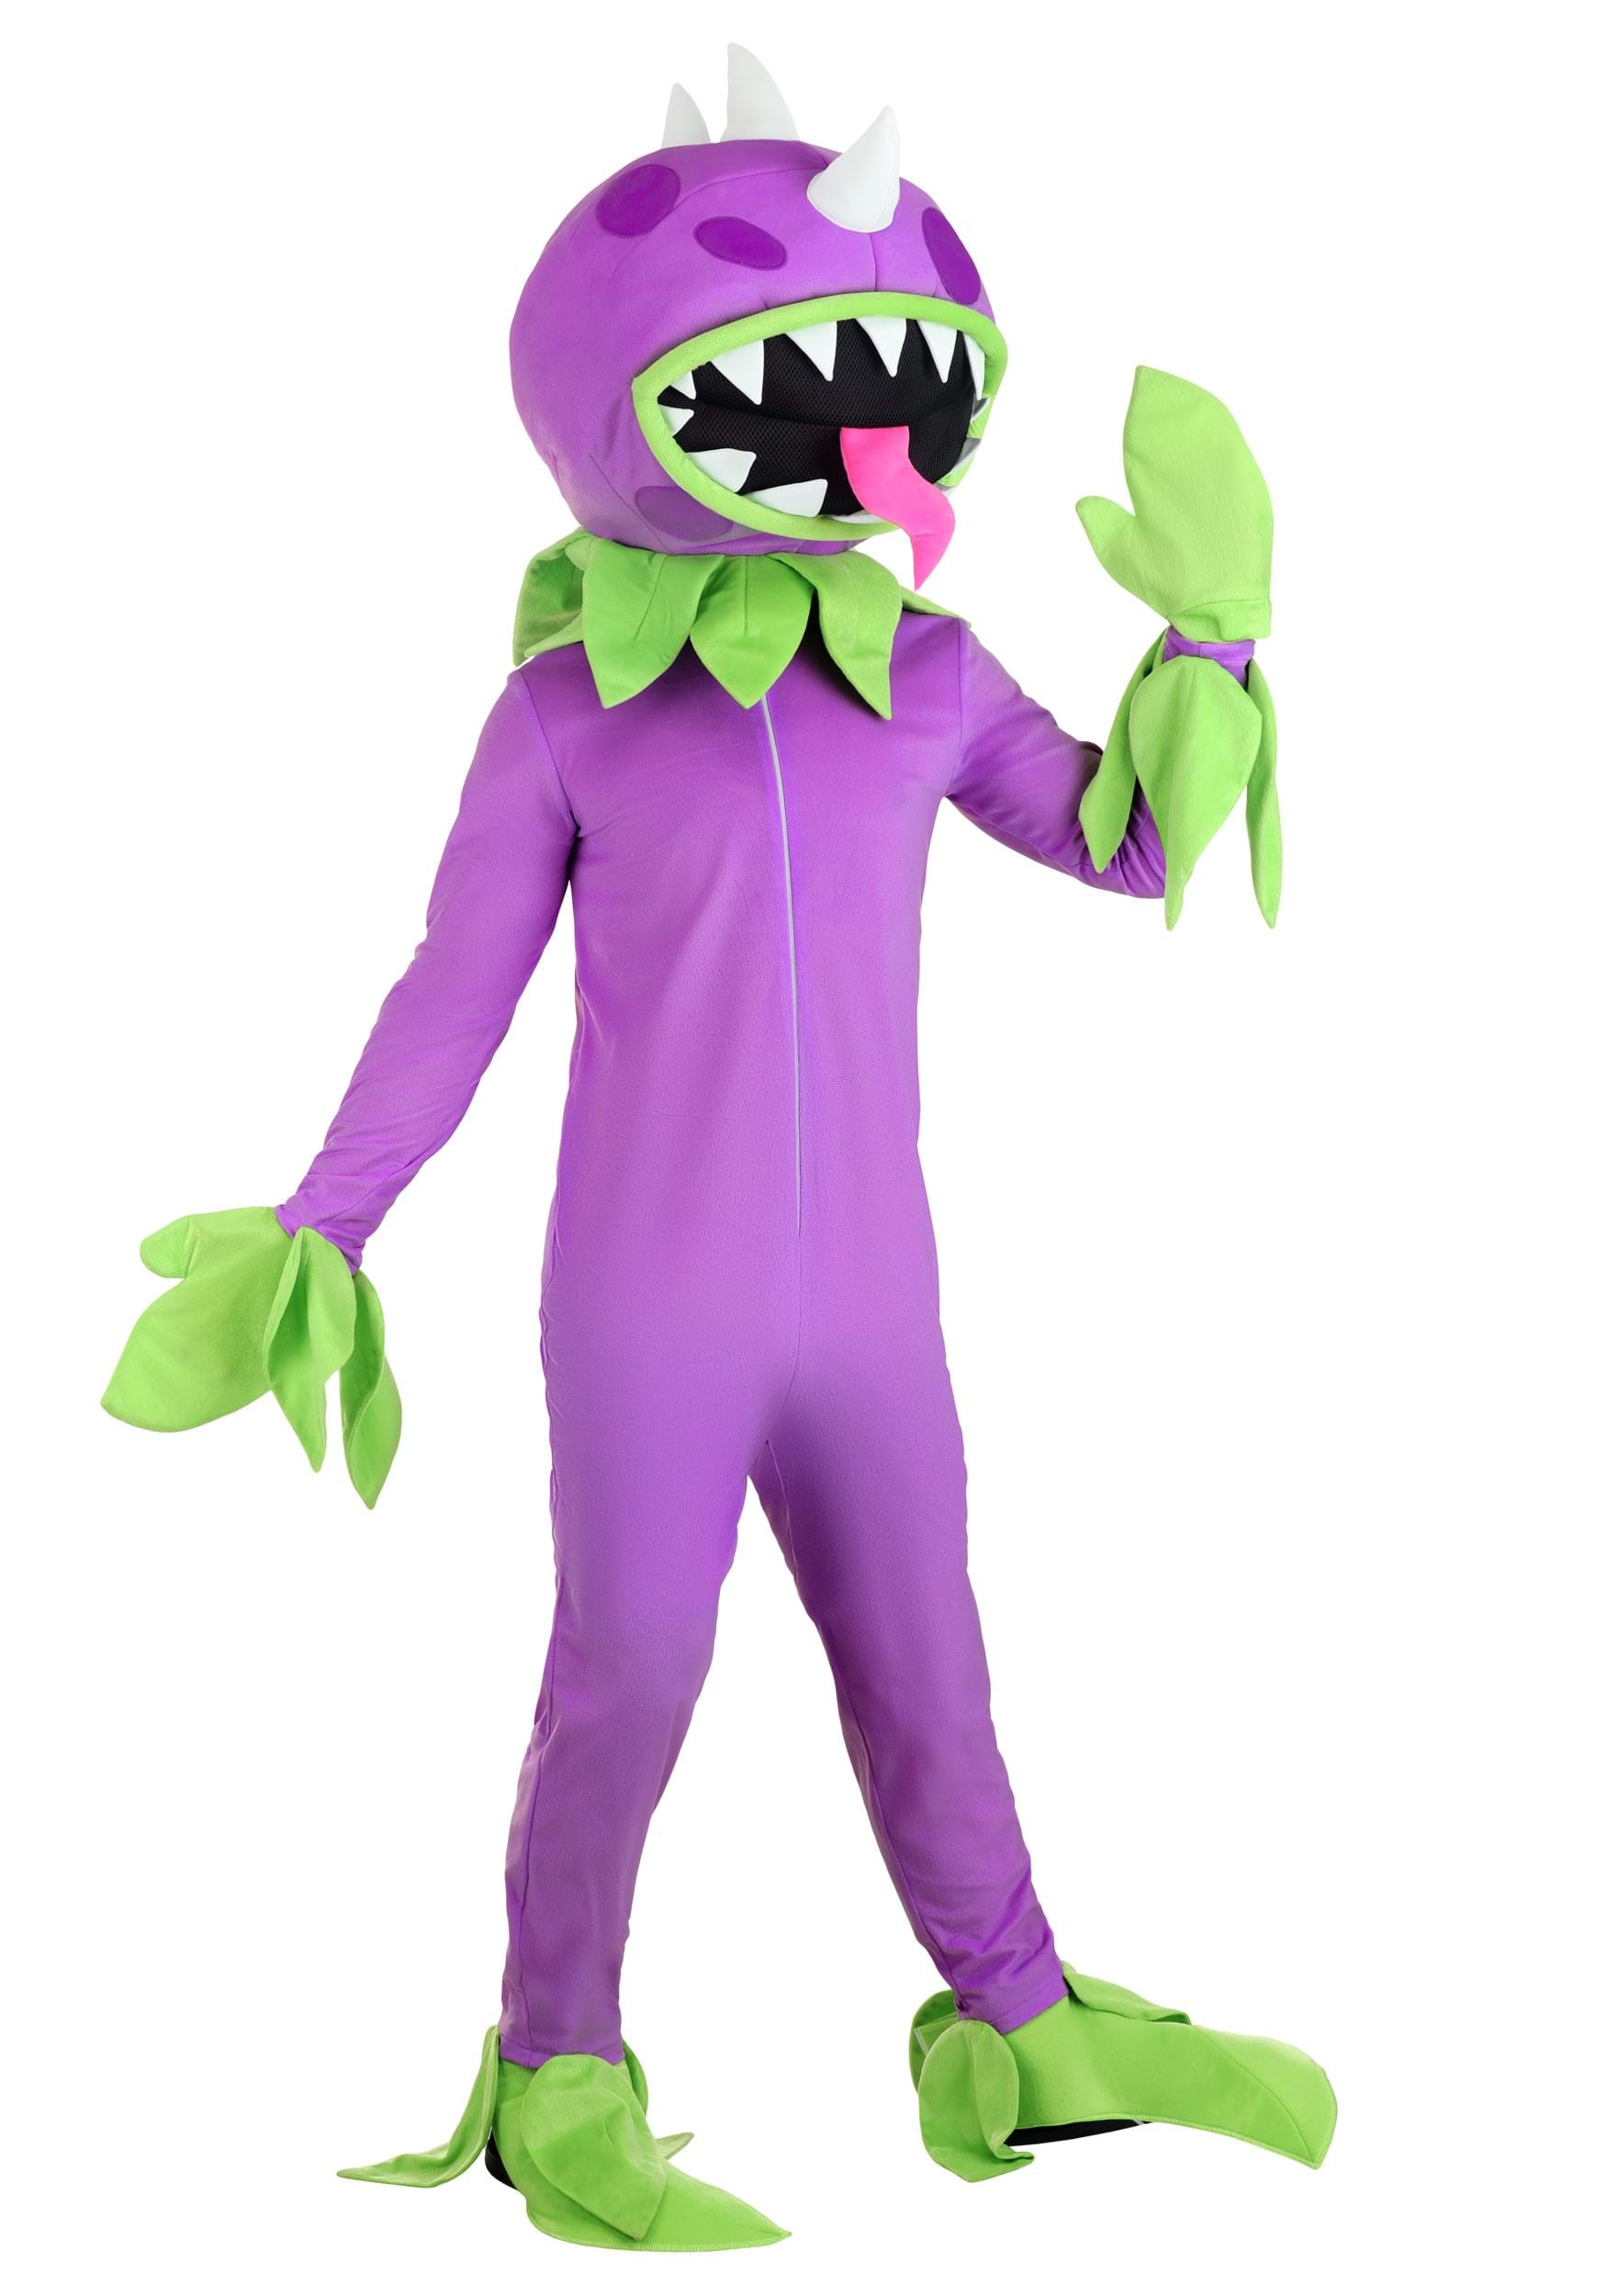 Plants vs Zombies Chomper Costume for Adults